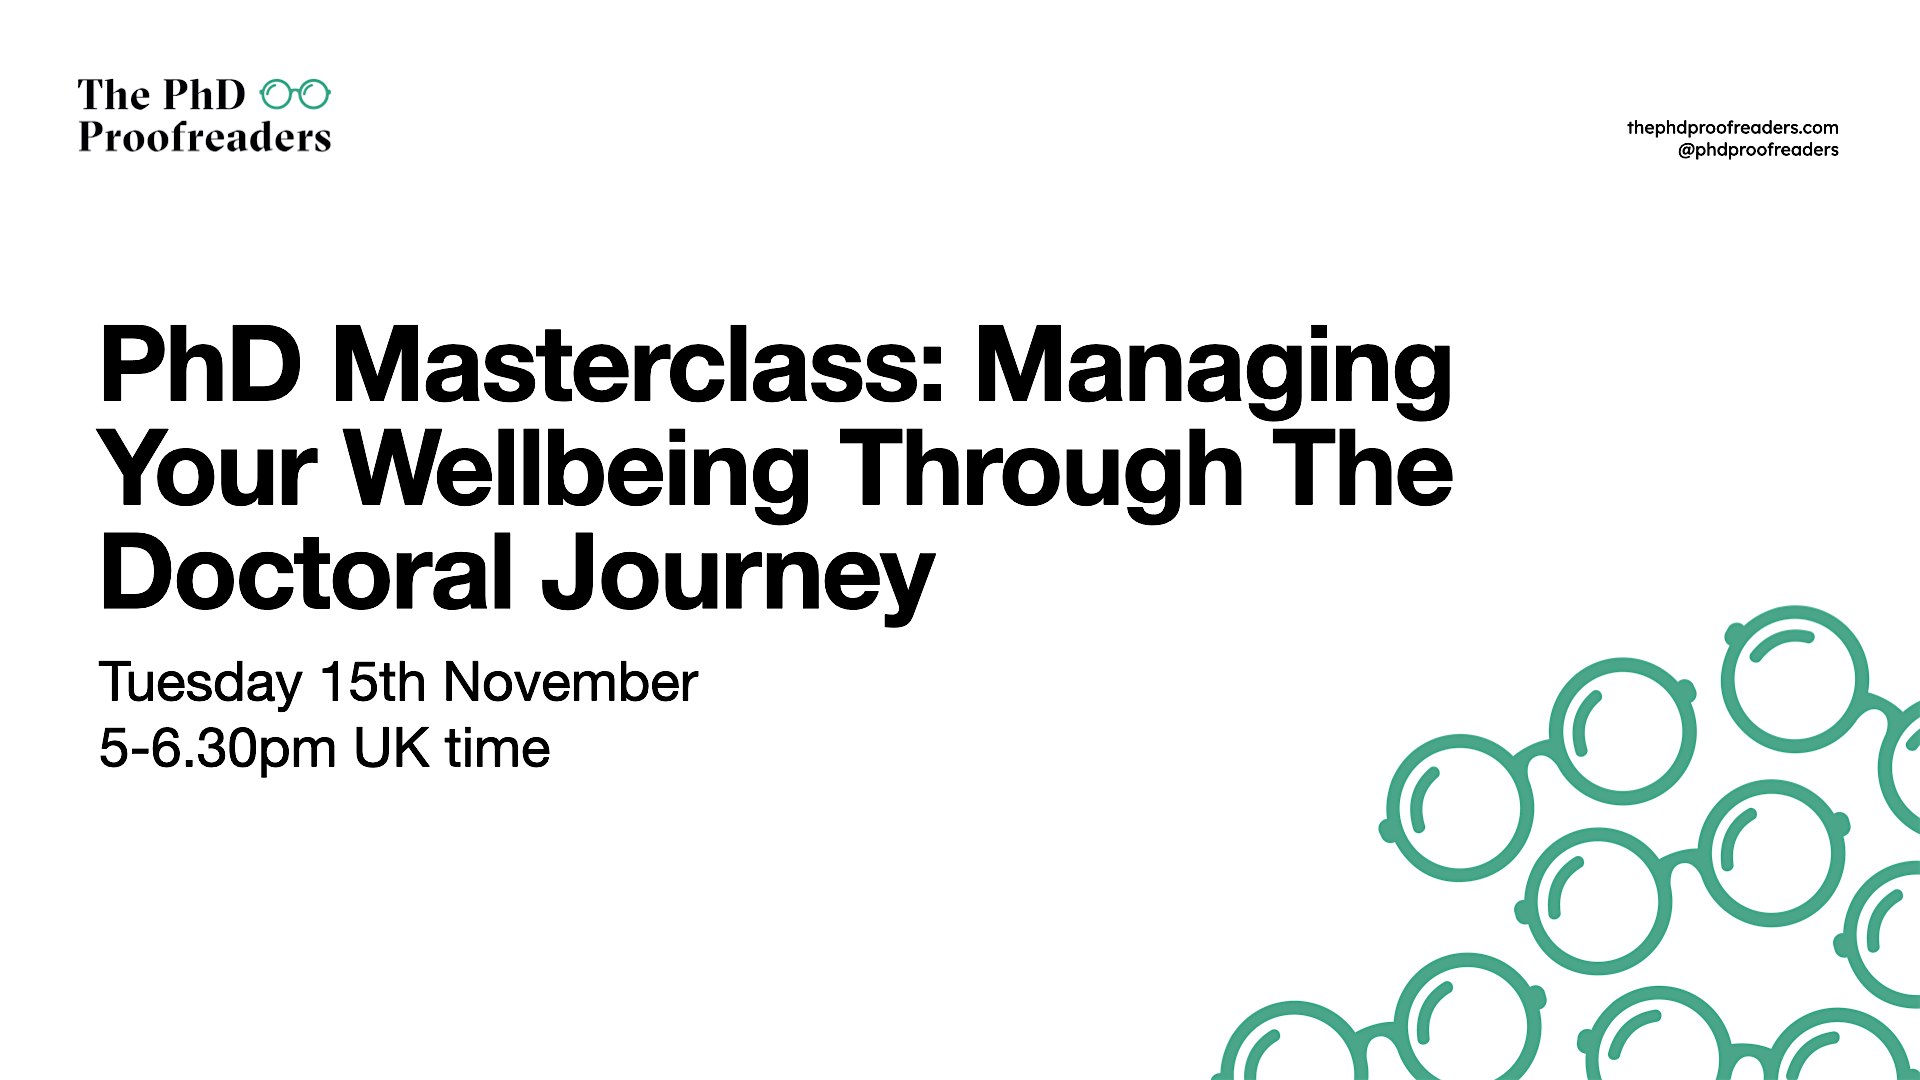 PhD Masterclass: Managing Your Wellbeing Through The Doctoral Journey